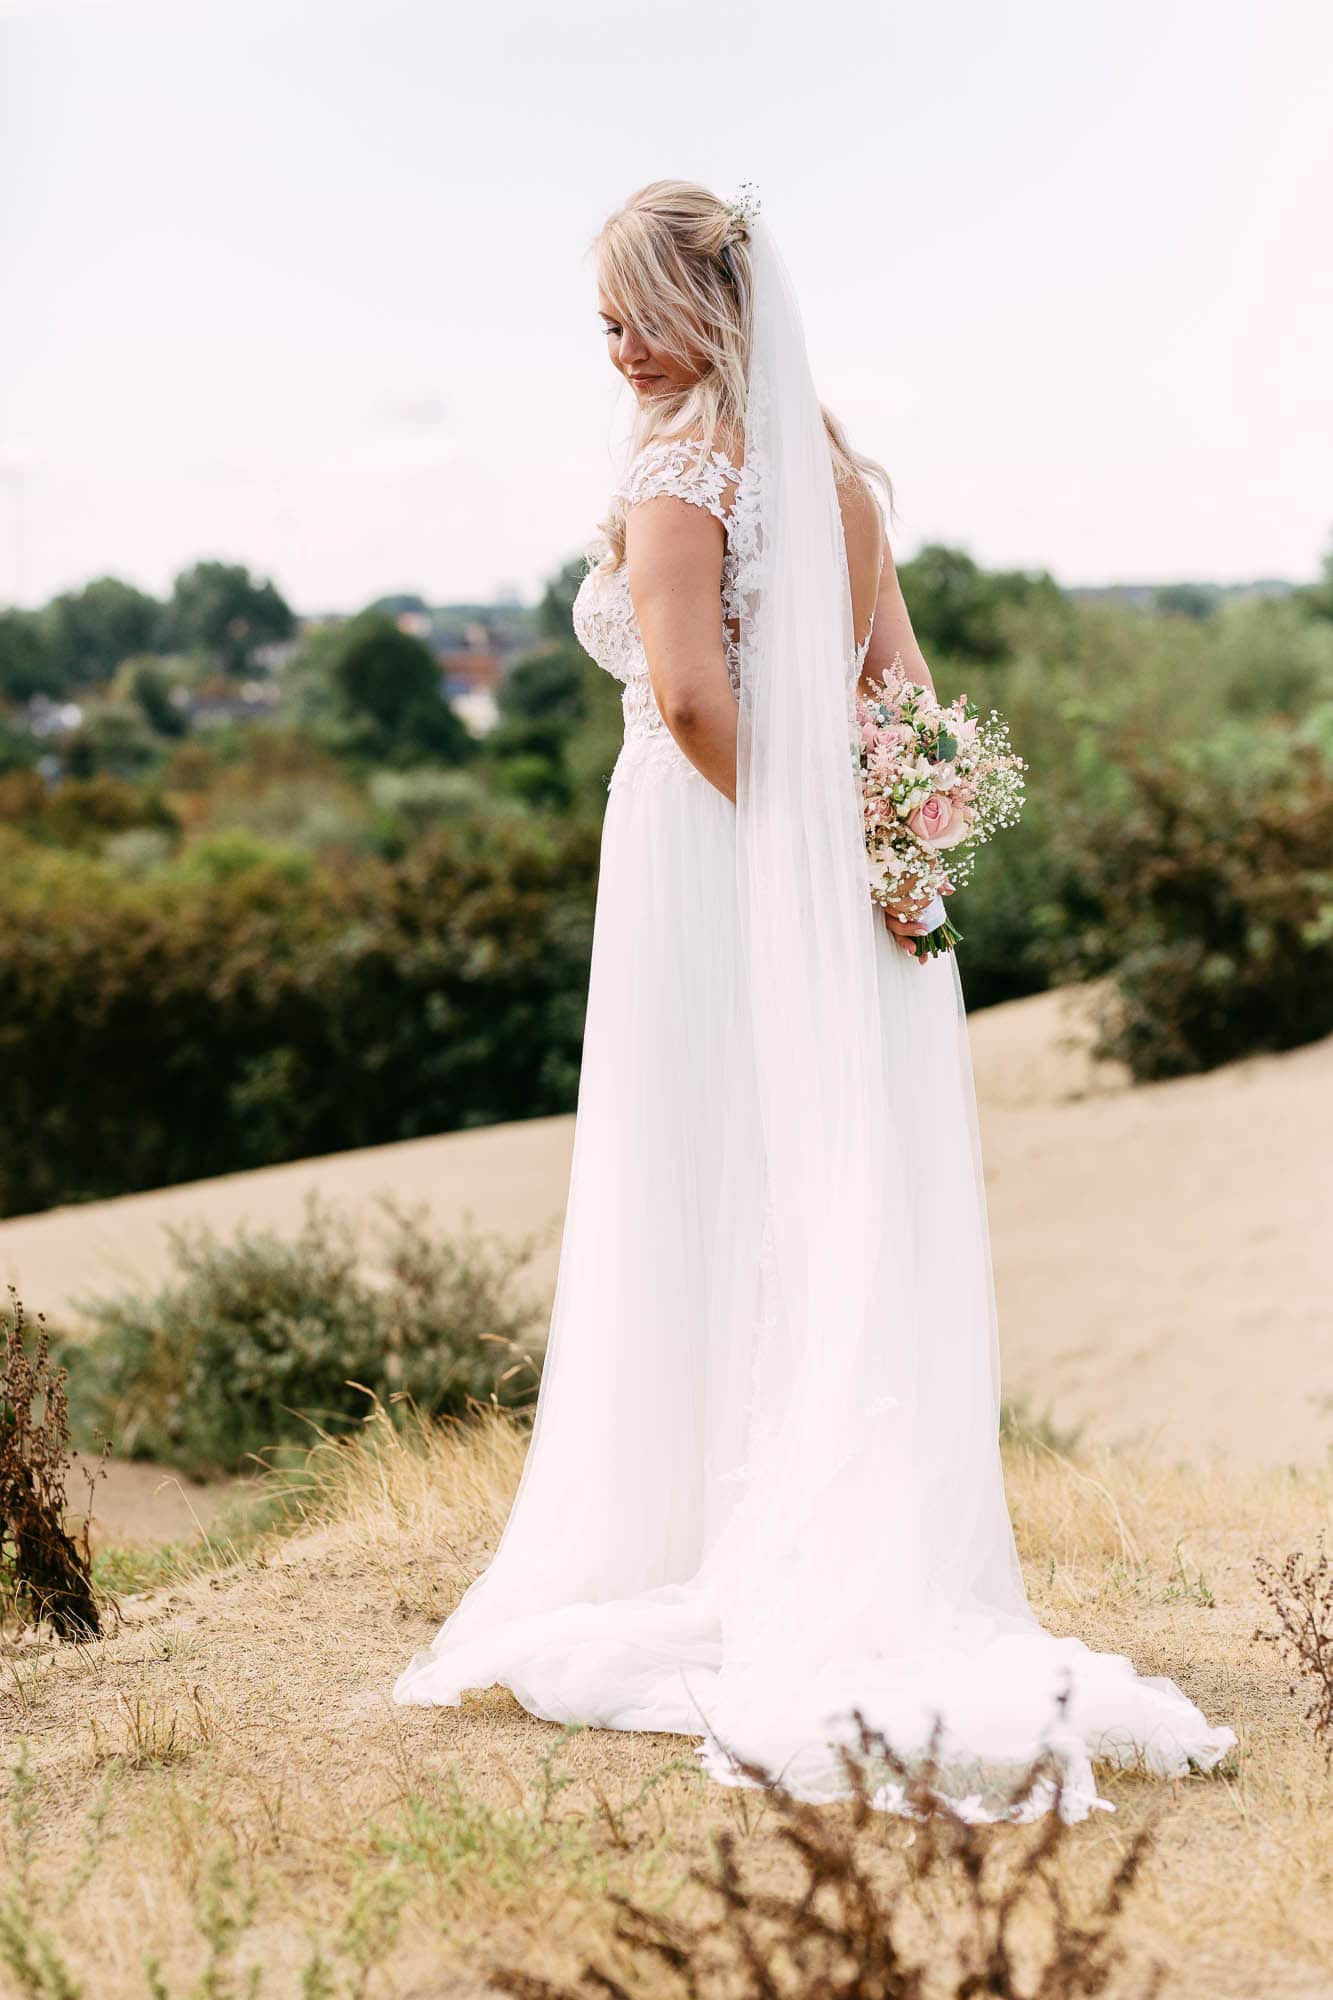 A bride in a white wedding dress standing in a sand dune.